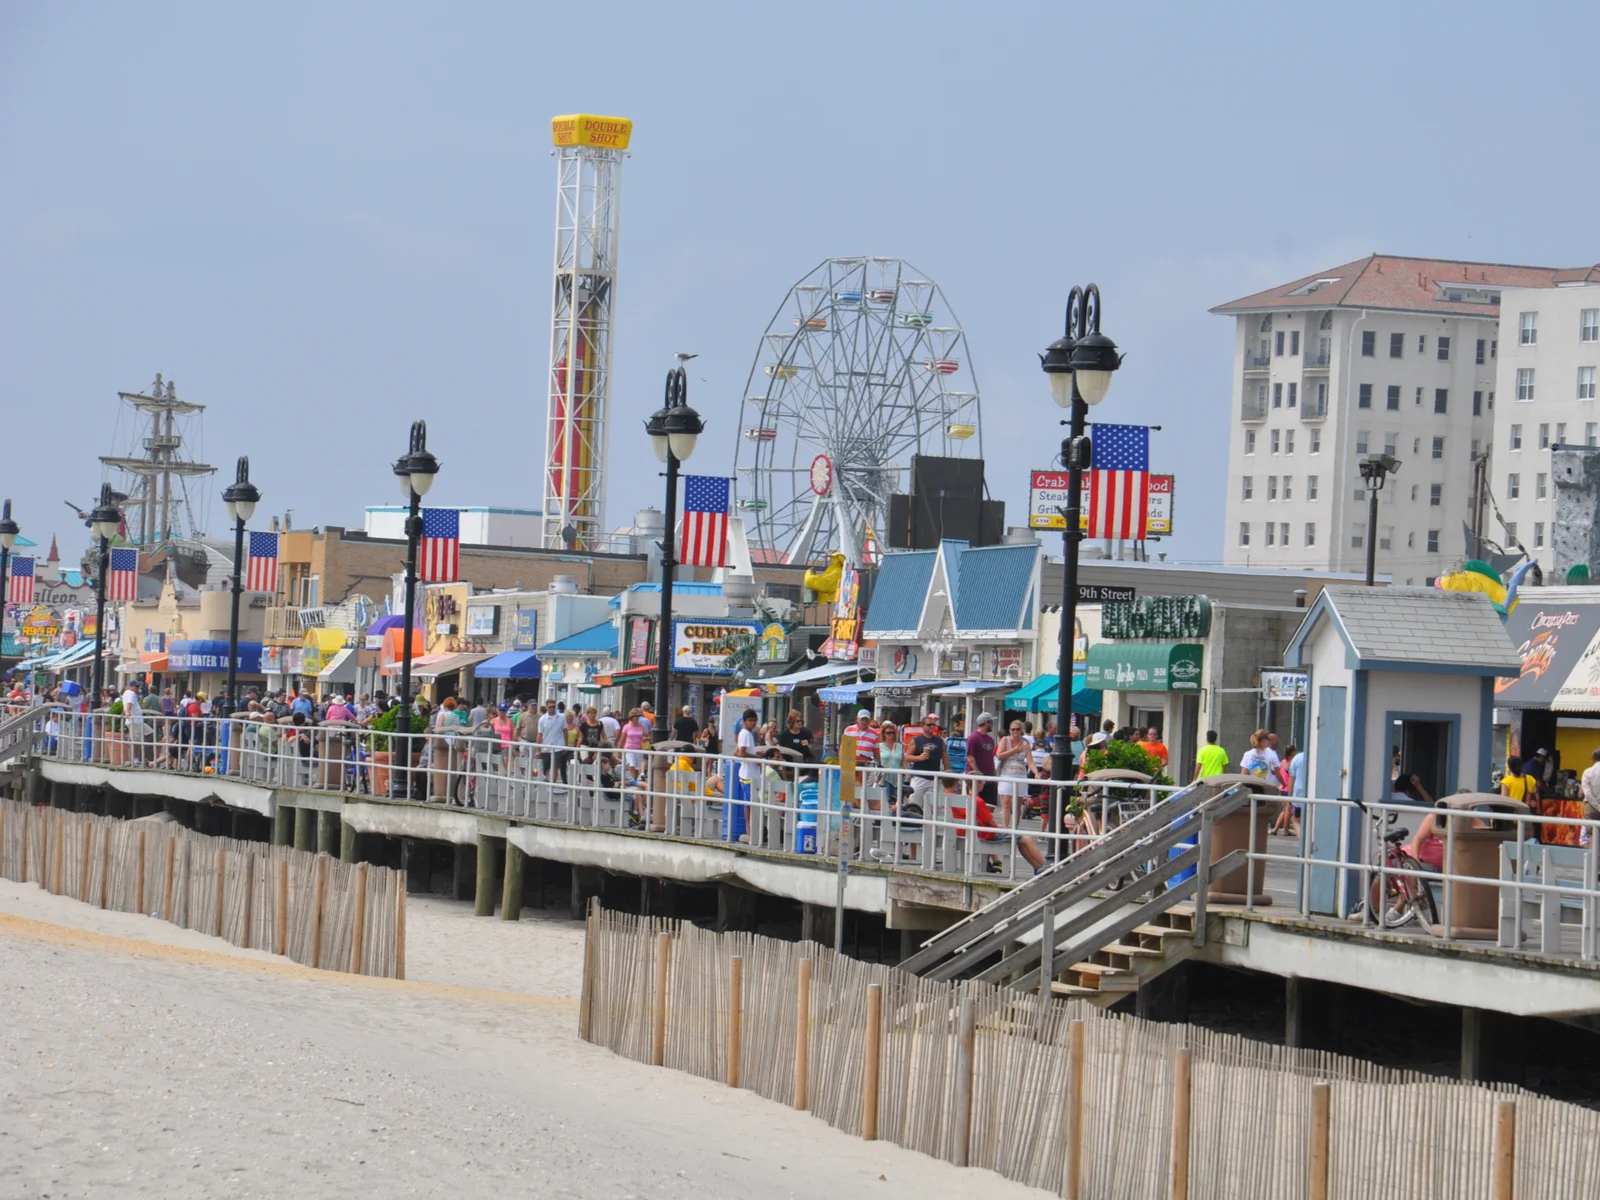 A busy day at Ocean City Boardwalk with a series of food stores, a medium-size ferris wheel and boat with sails in background, one of the best things to do in New Jersey